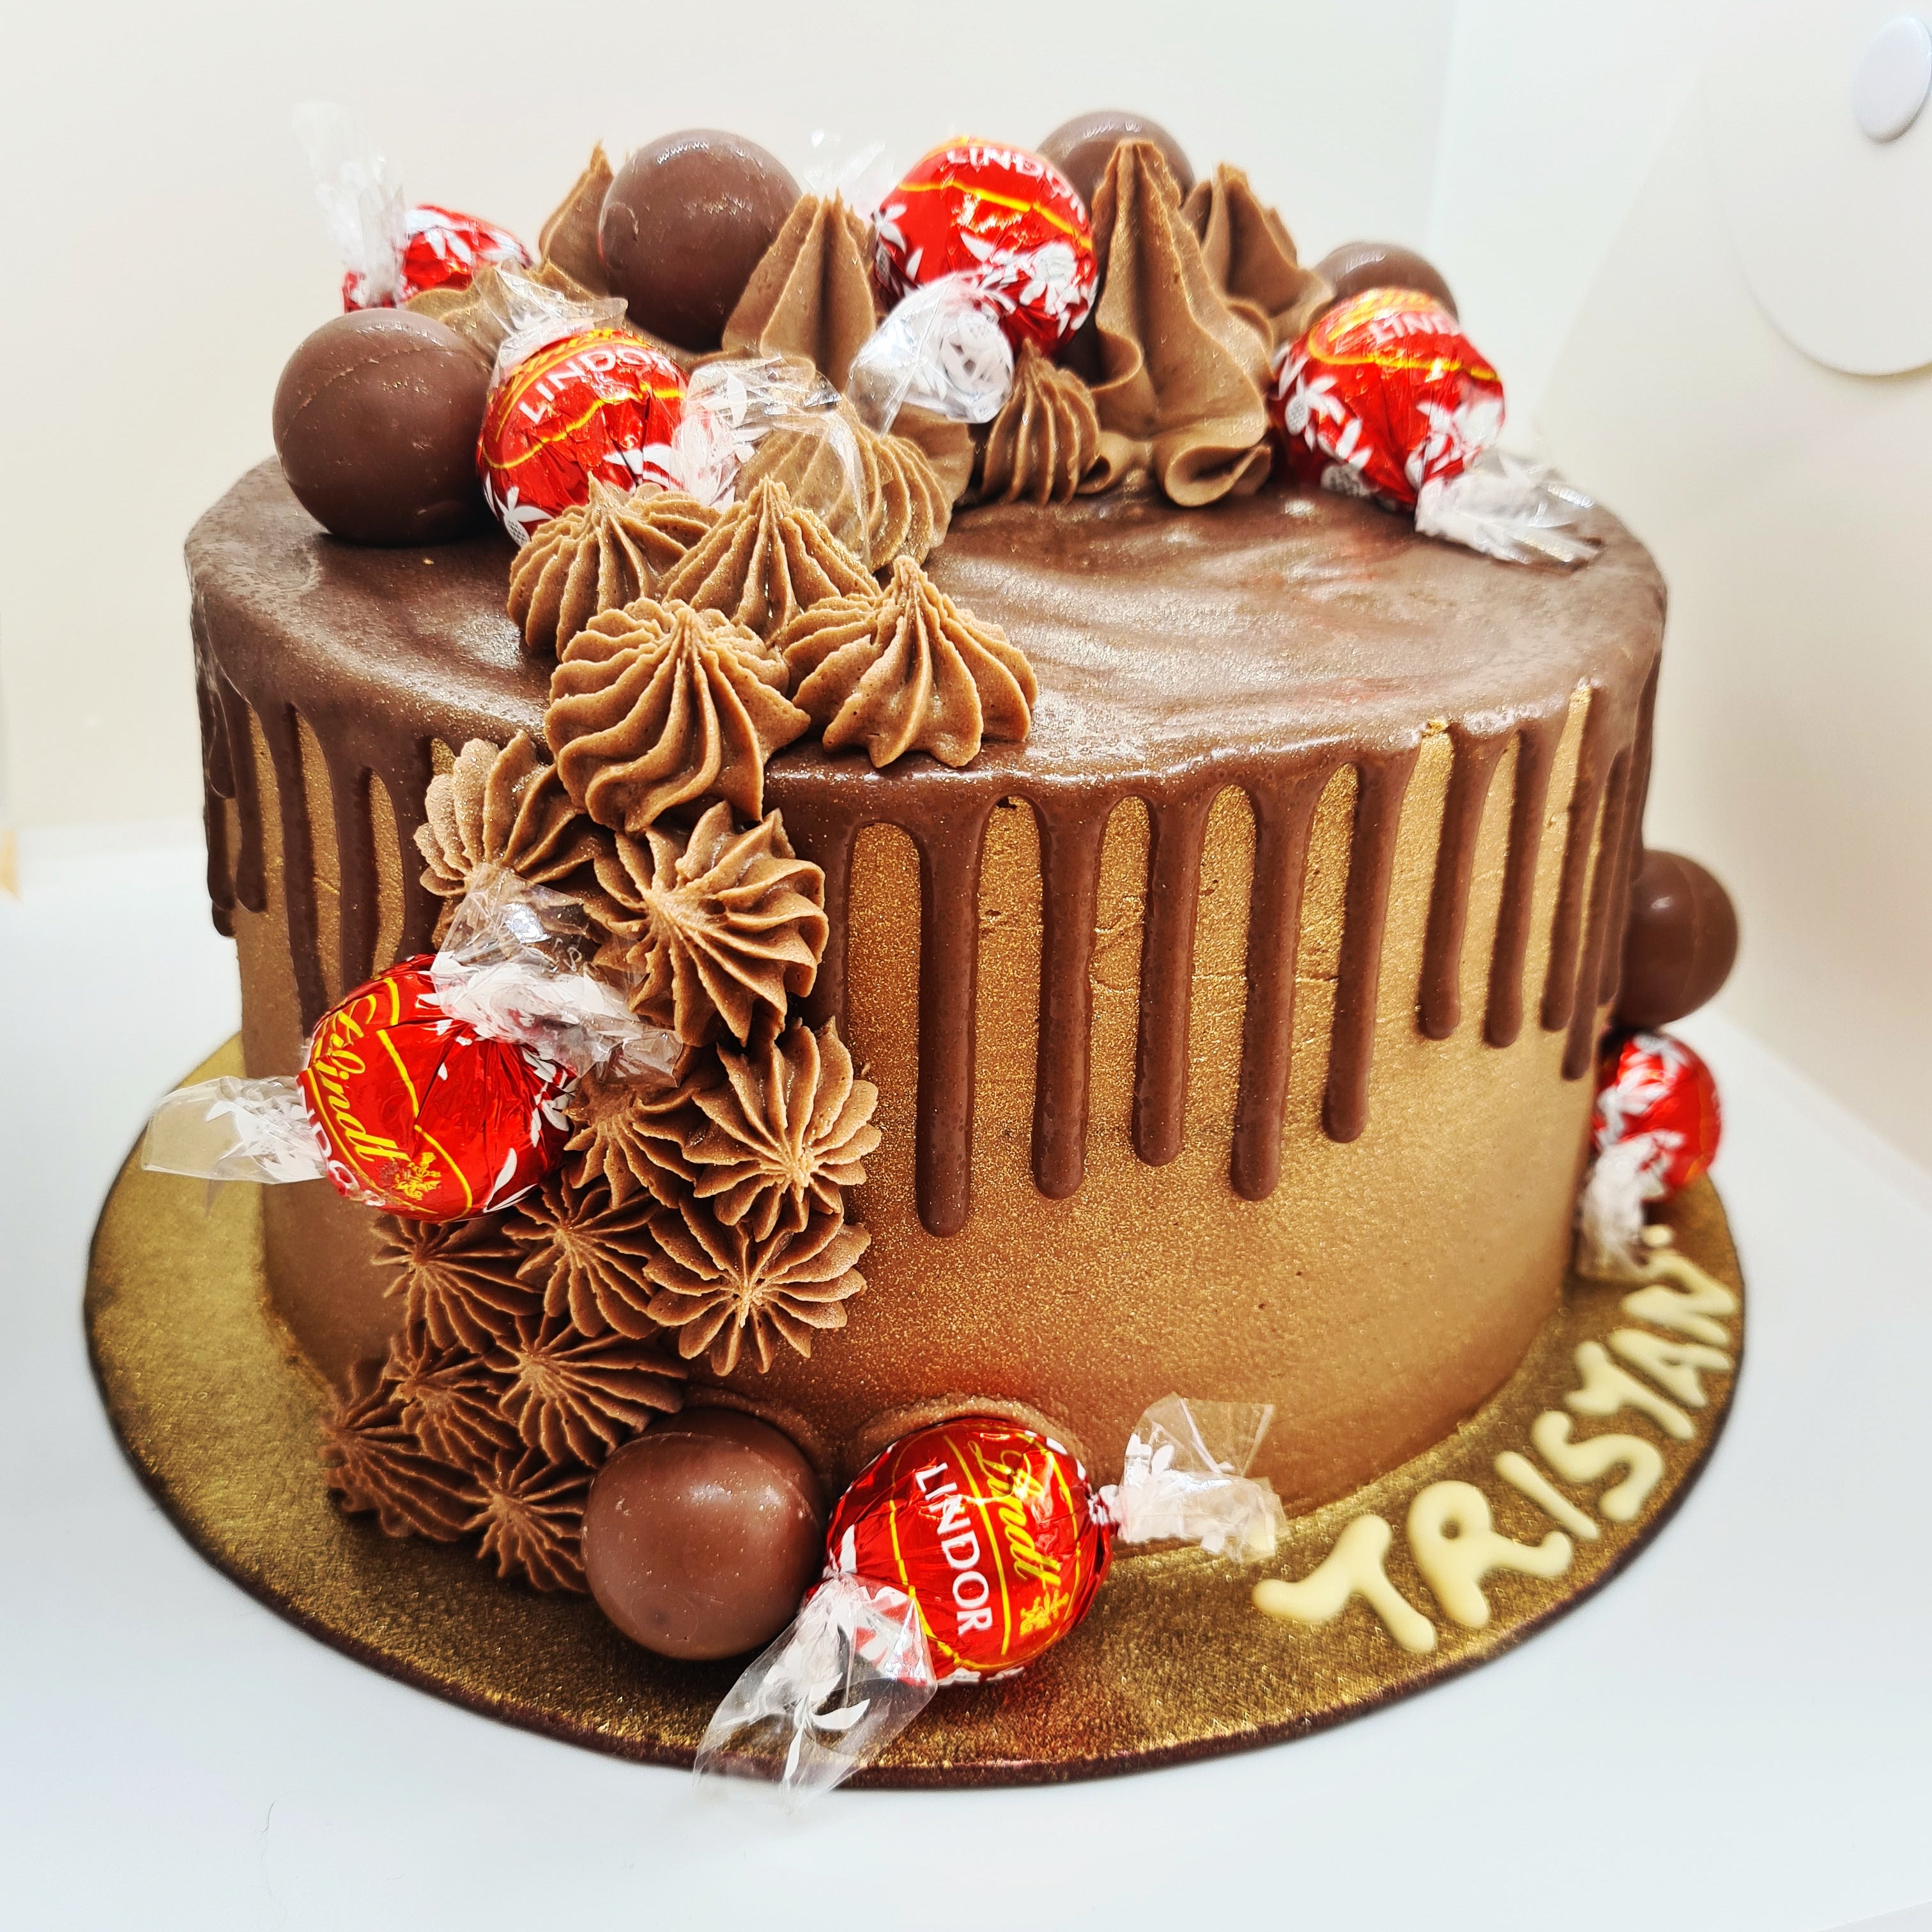 A Lindt Lindor cake with chocolate top and Lindt Lindor sweets